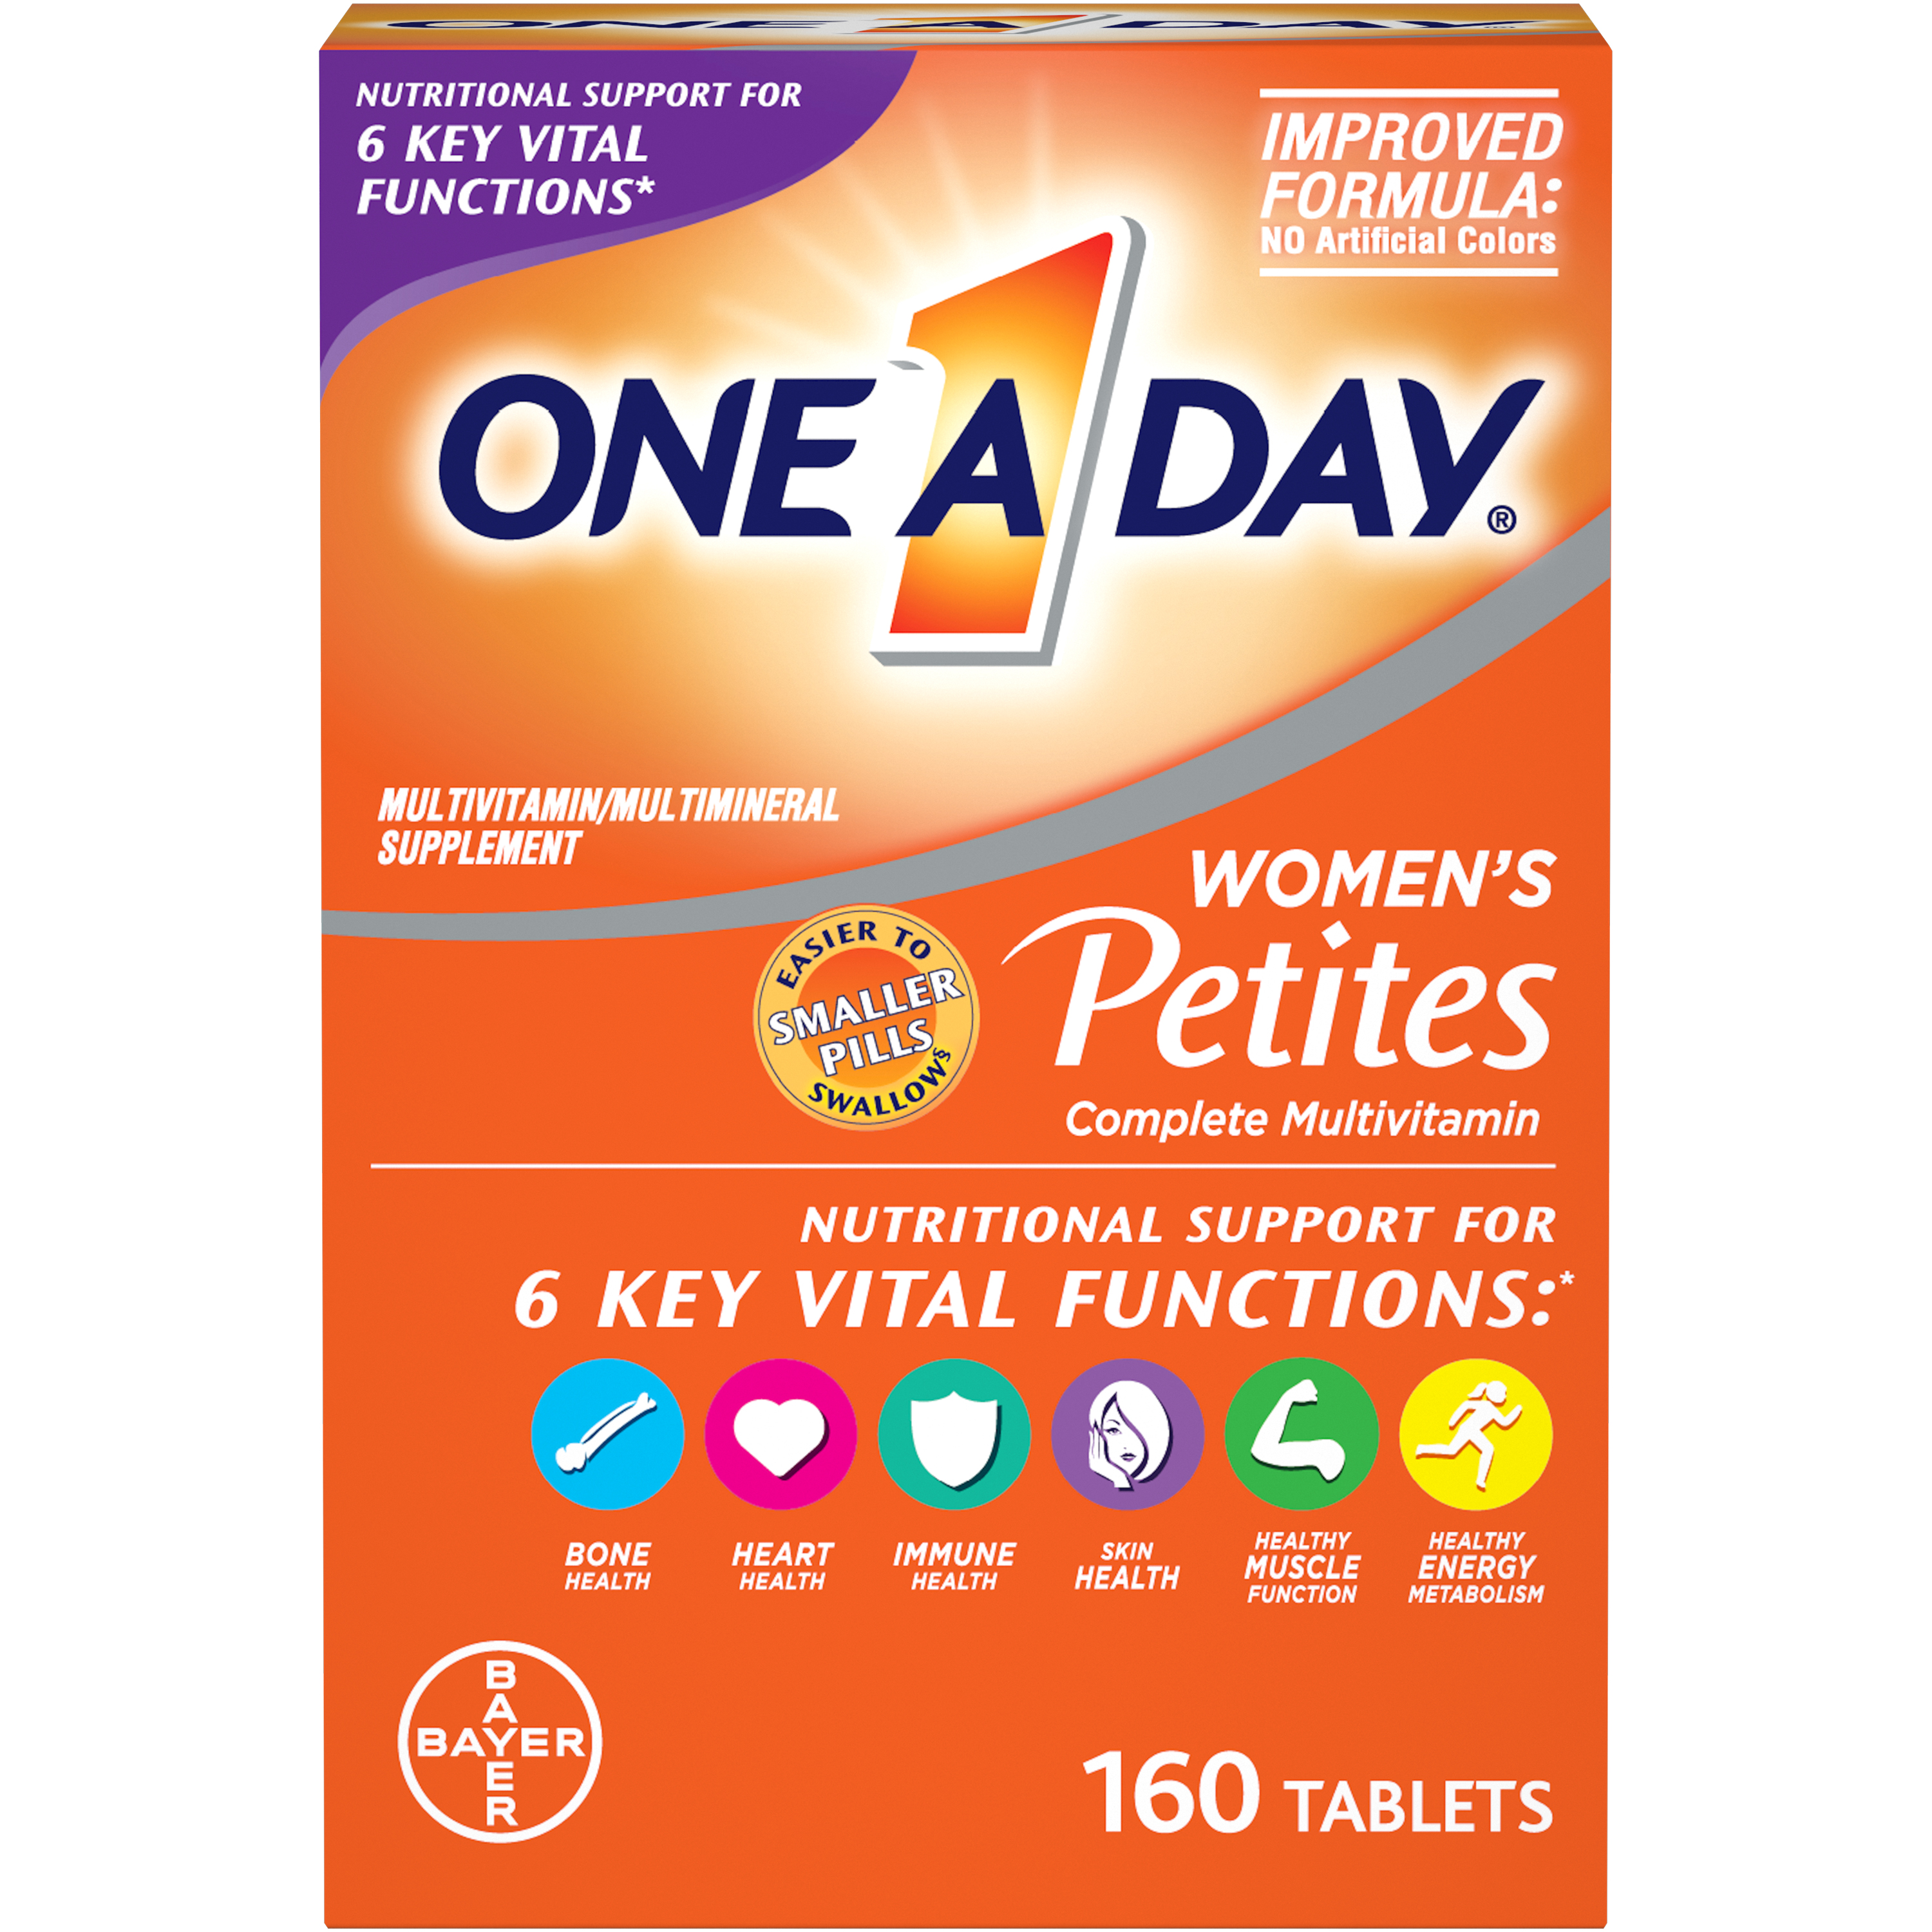 One A Day Women's Petites Tablets, Multivitamins for Women, 160 Ct - image 3 of 12